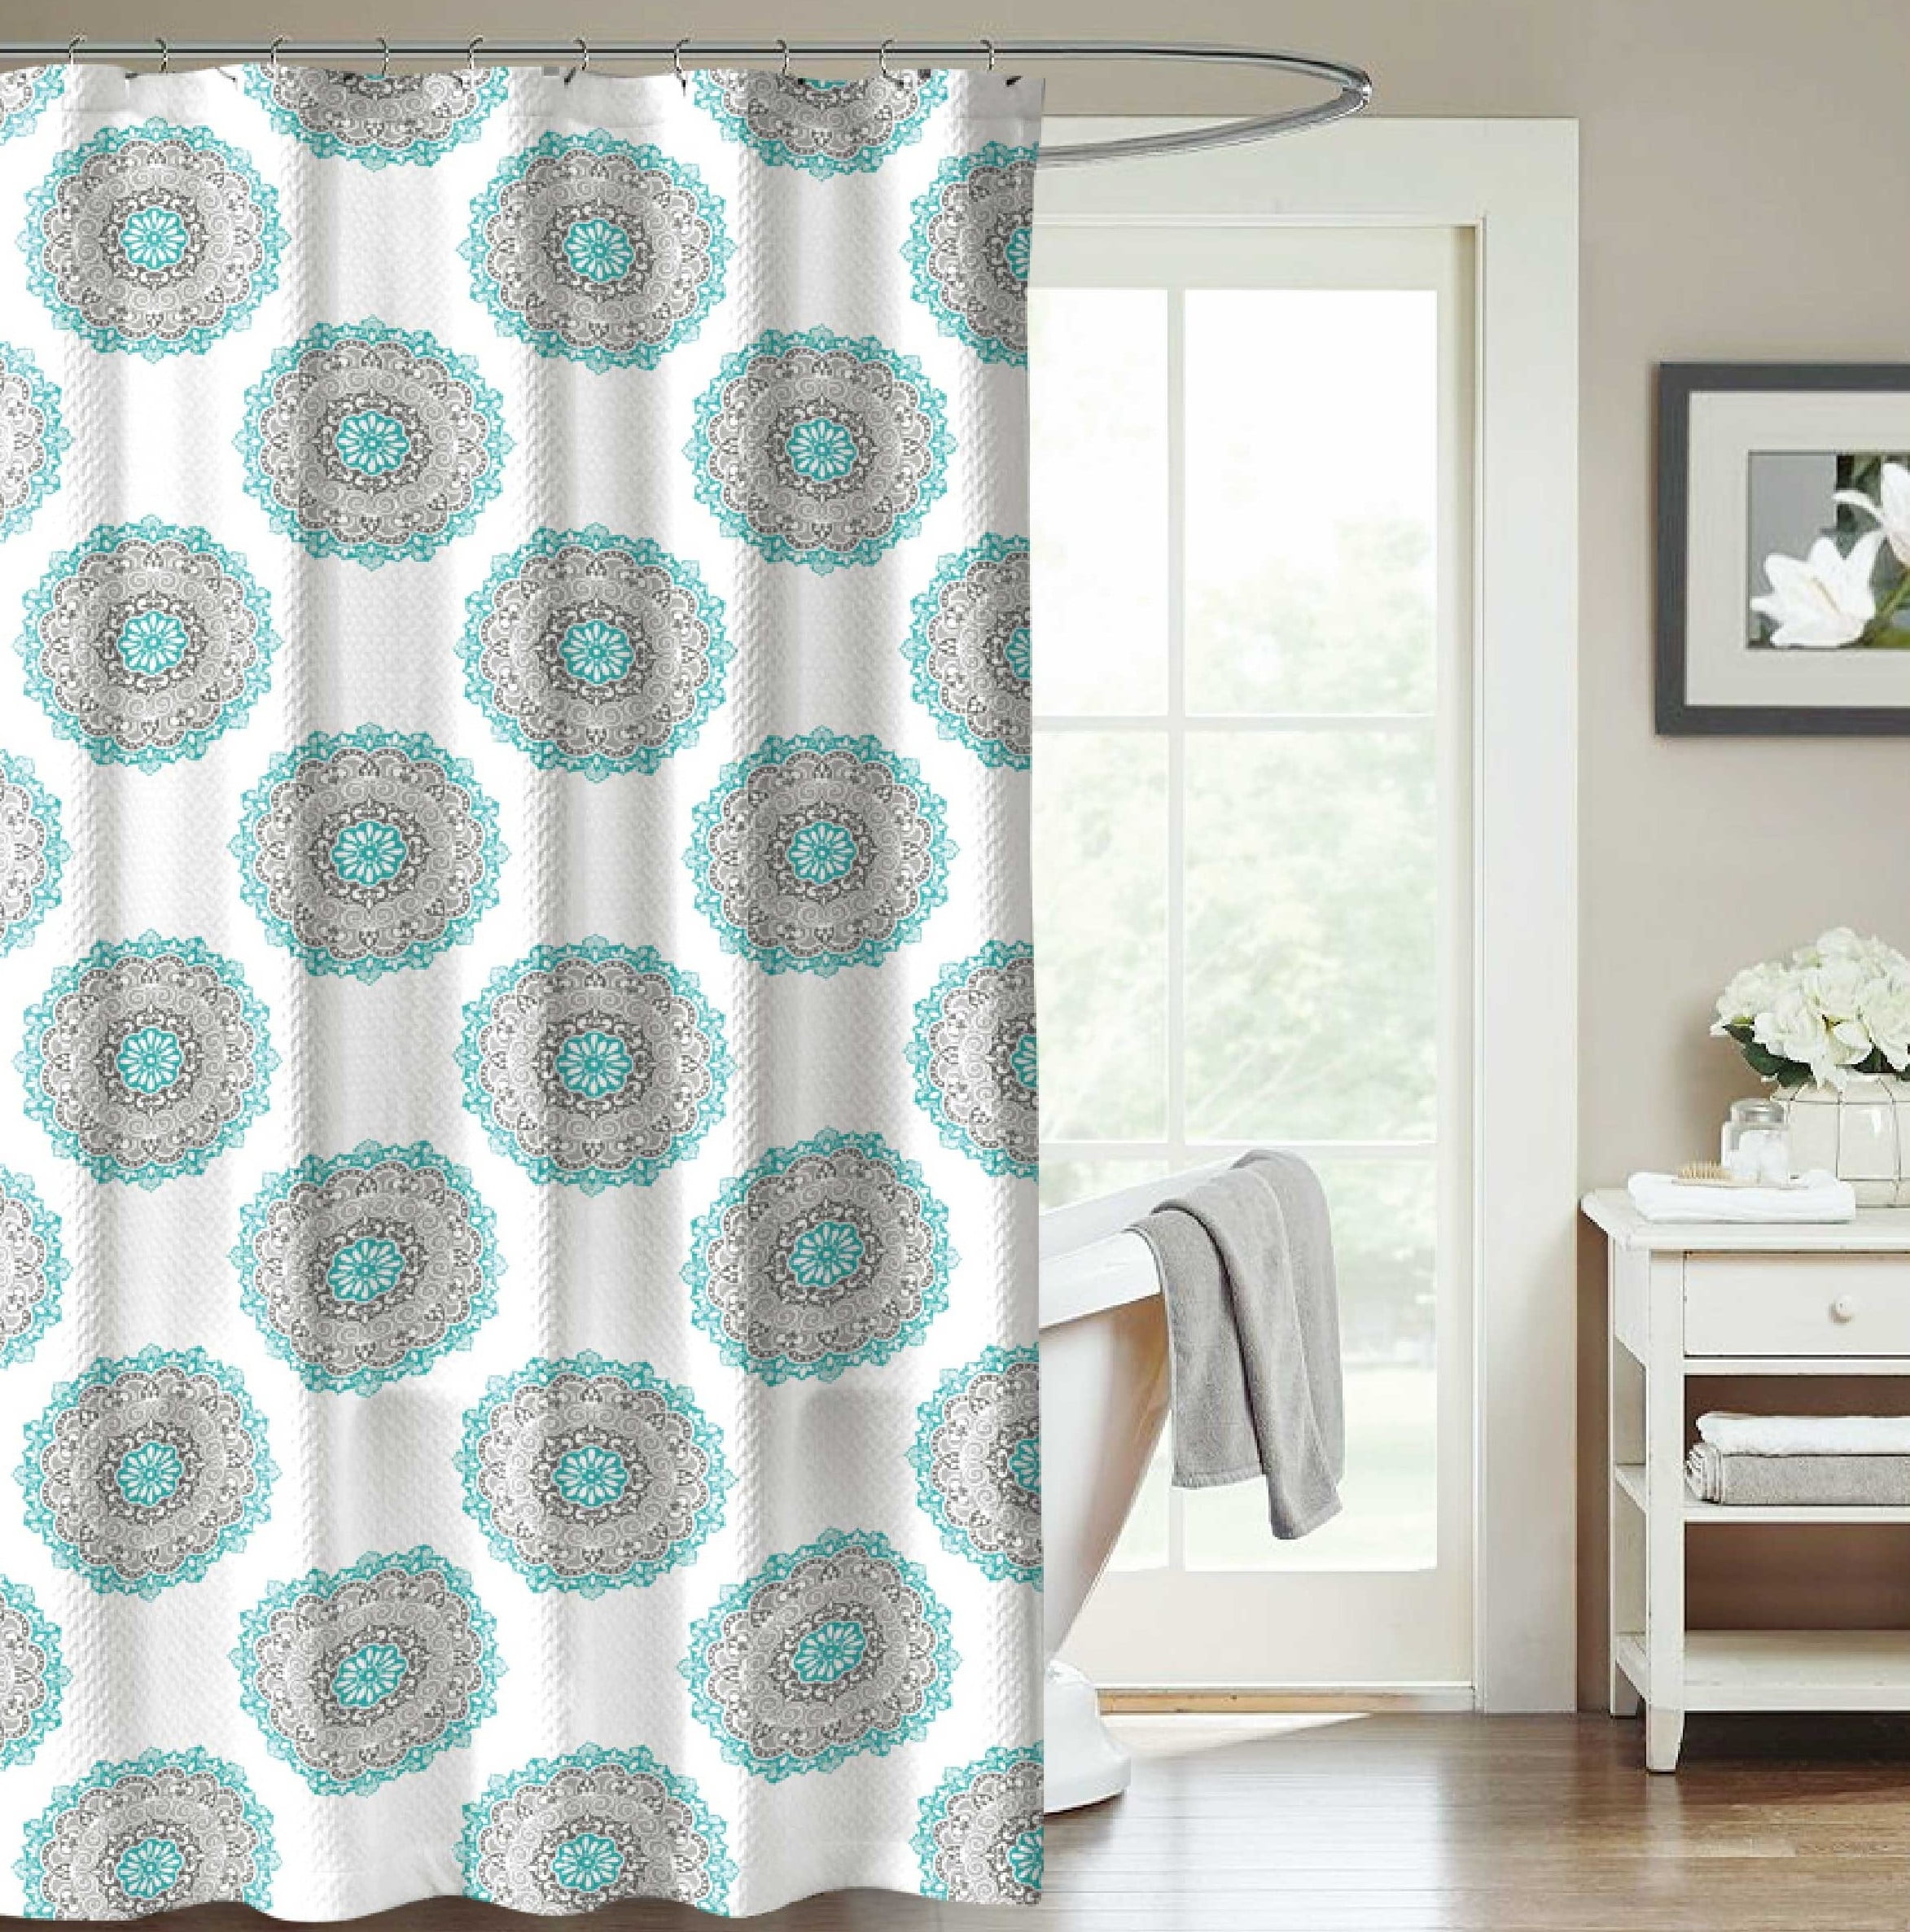 C.H.D Home Turquoise Grey White Fabric Shower Curtain Decorative Floral 